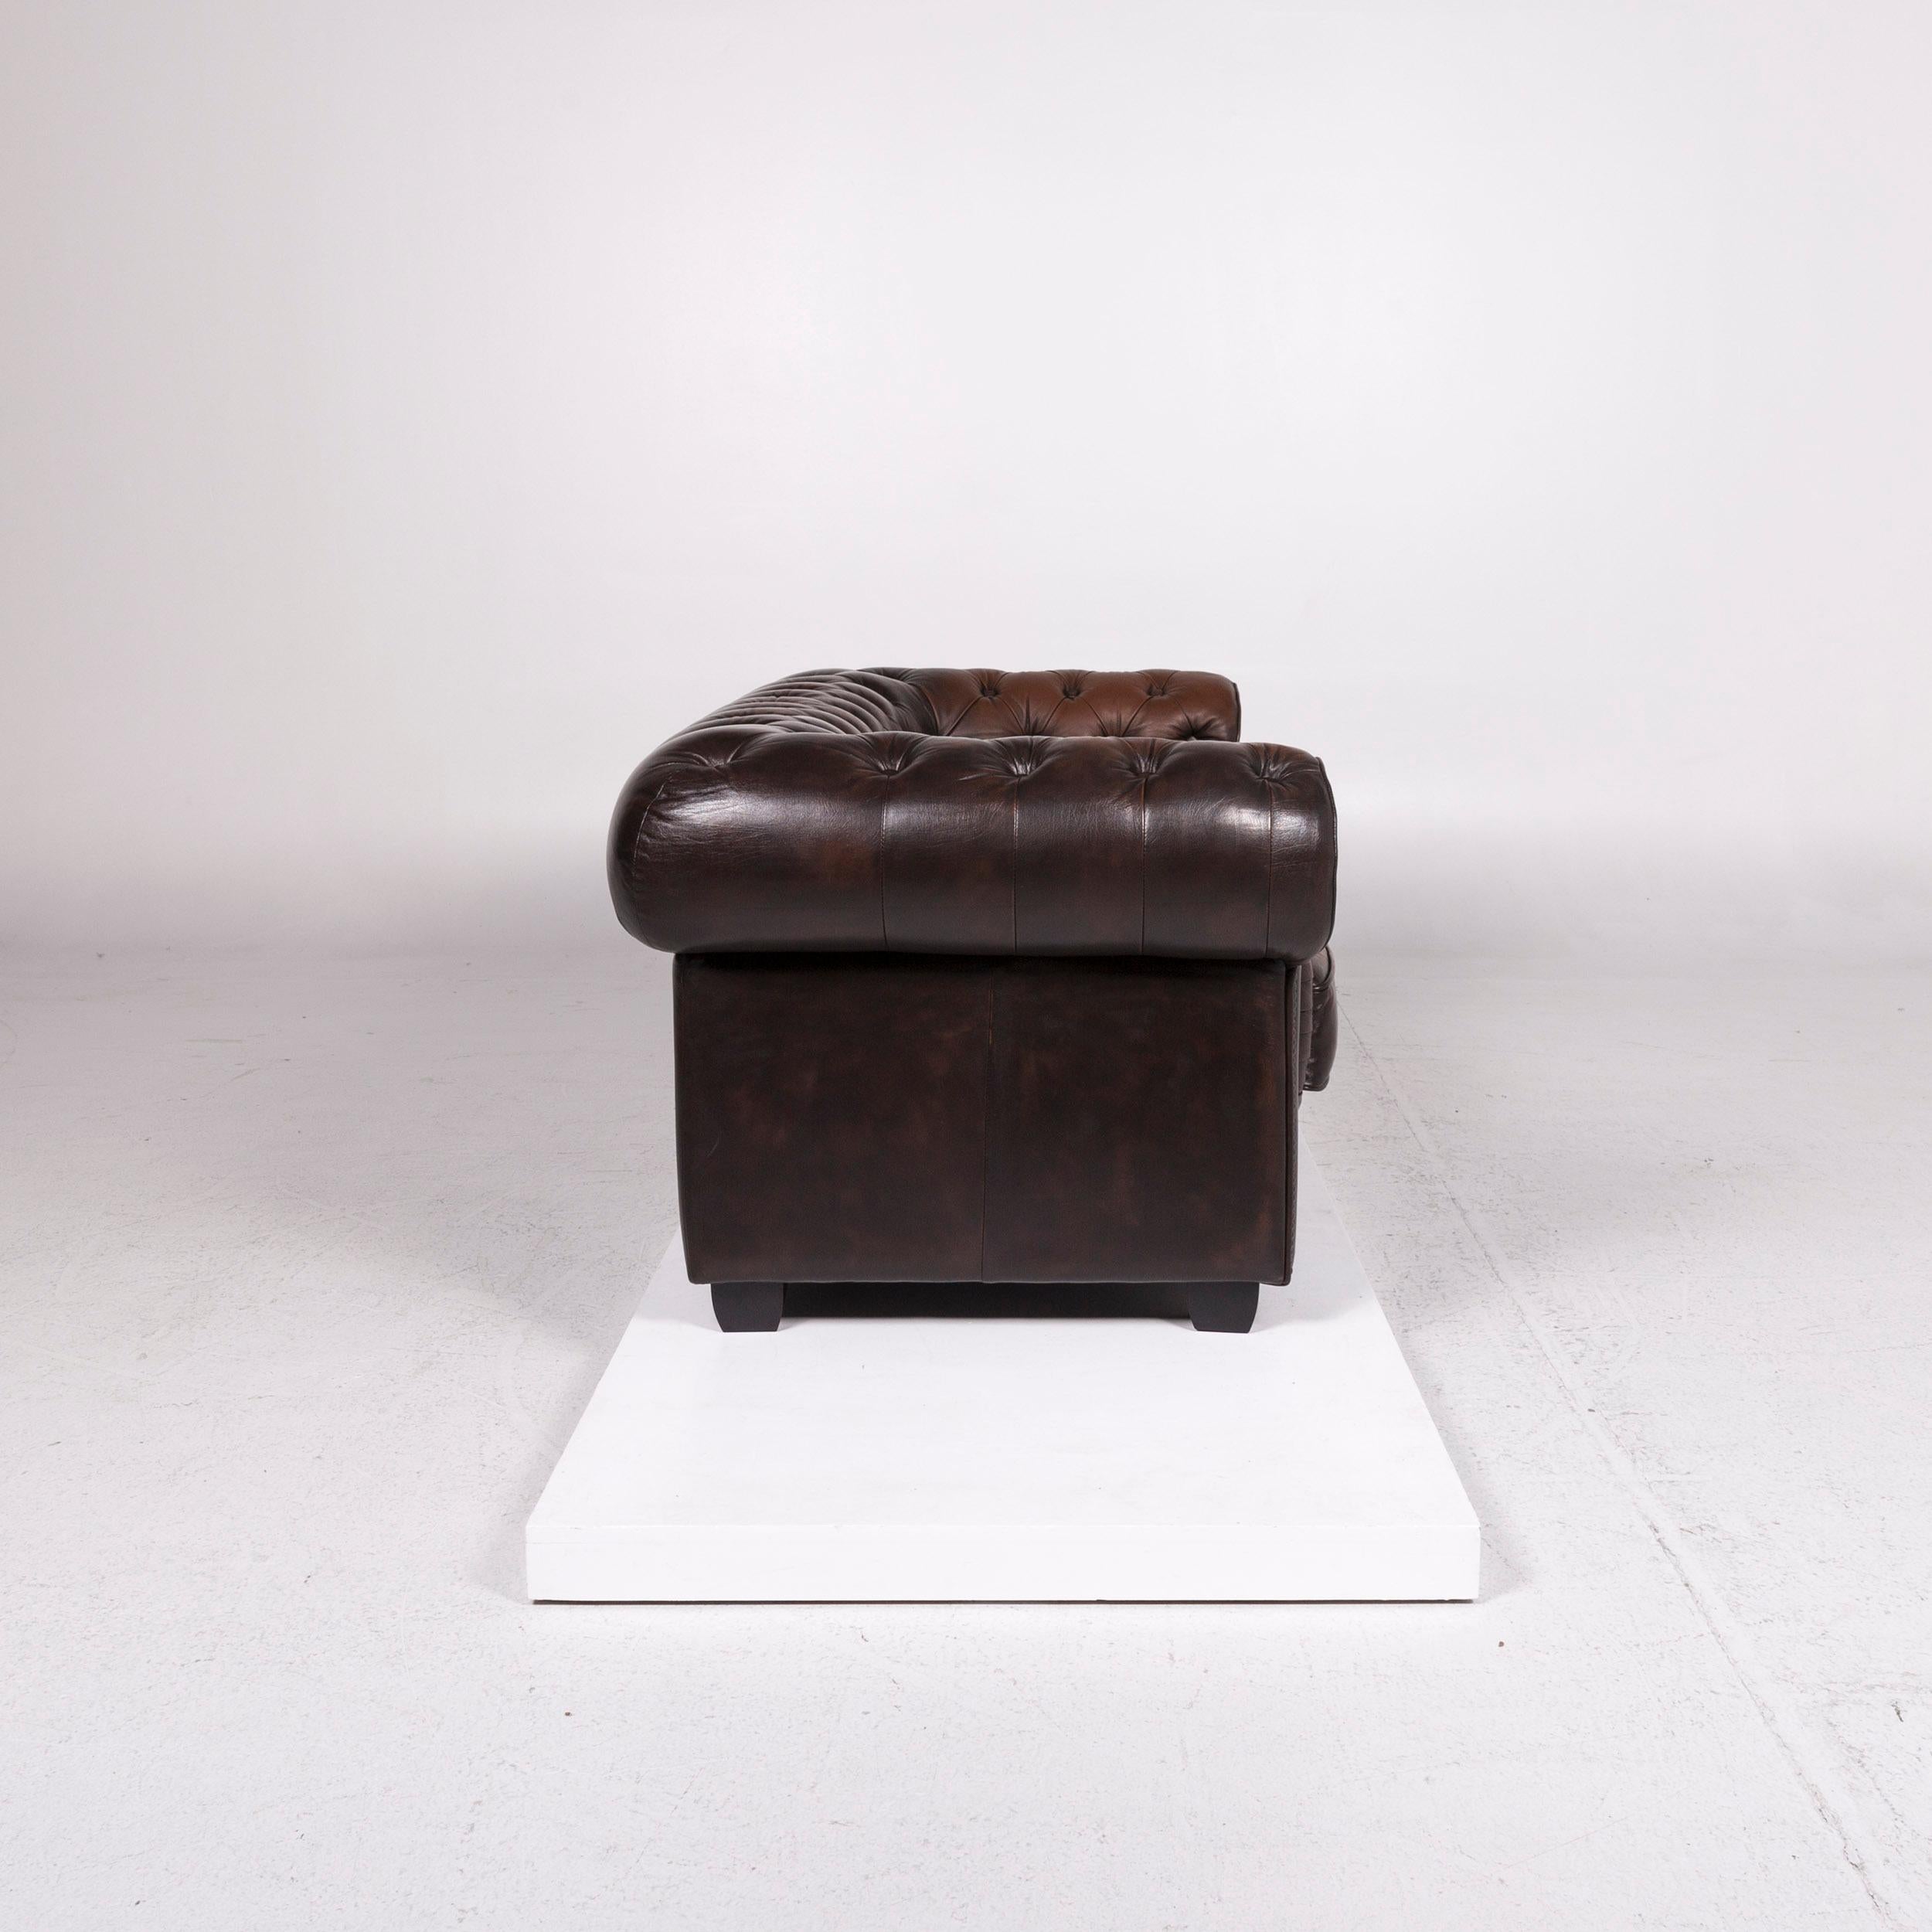 Chesterfield Leather Sofa Brown Dark Brown Two-Seat Retro Couch 2